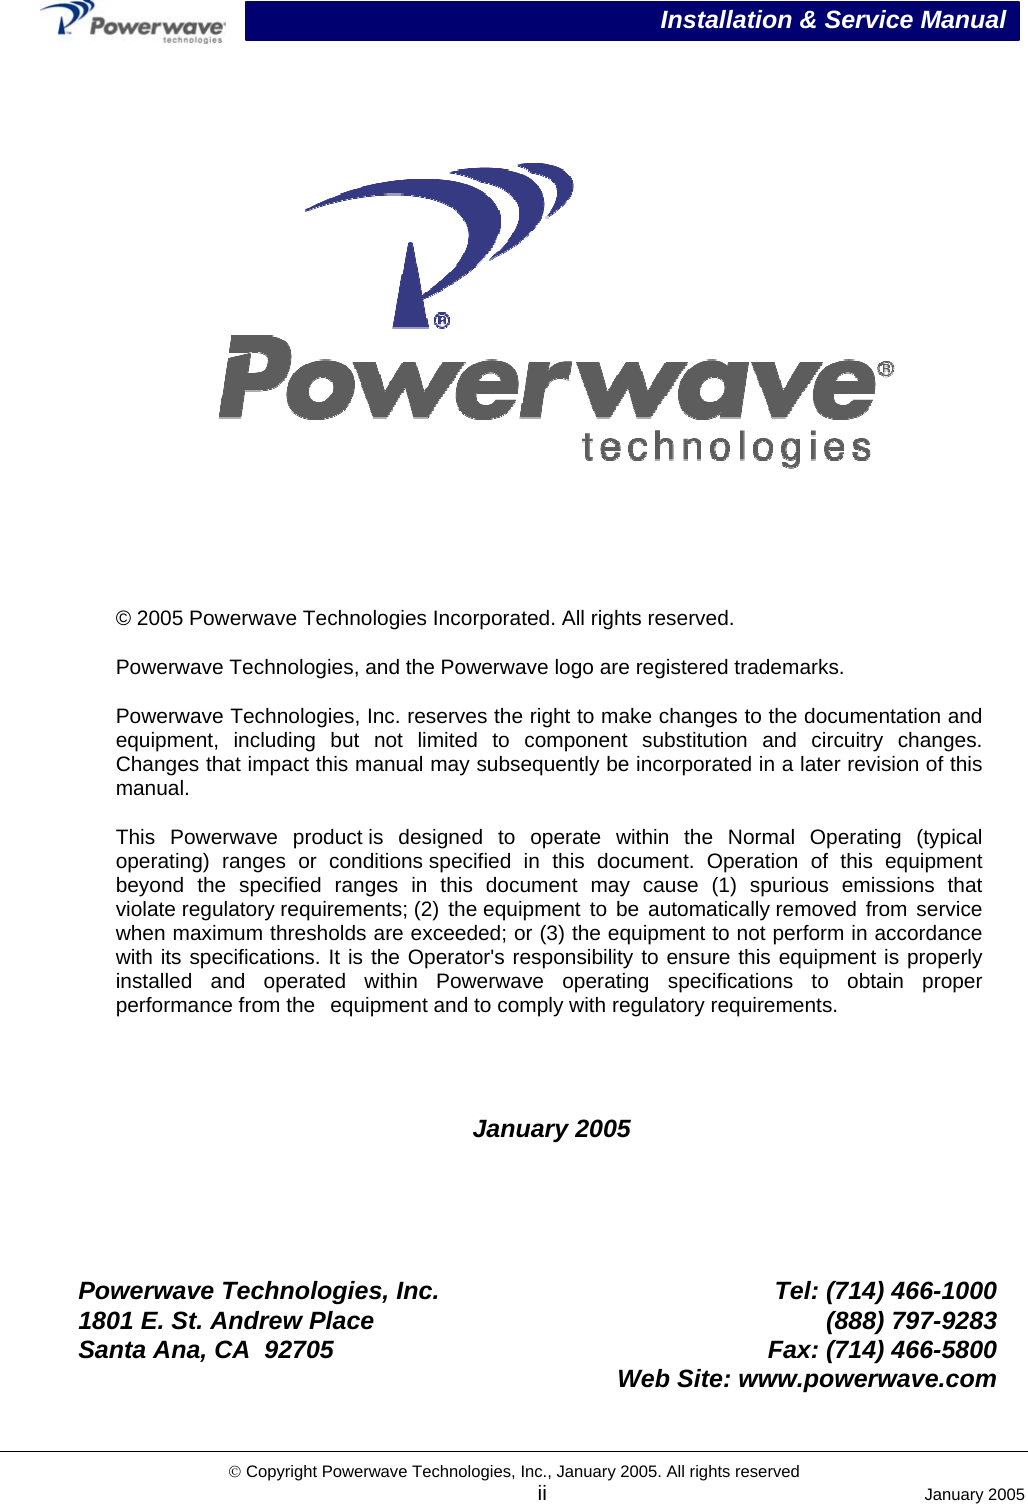  Installation &amp; Service Manual     © 2005 Powerwave Technologies Incorporated. All rights reserved. Powerwave Technologies, and the Powerwave logo are registered trademarks. Powerwave Technologies, Inc. reserves the right to make changes to the documentation andequipment, including but not limited to component substitution and circuitry changes.Changes that impact this manual may subsequently be incorporated in a later revision of thismanual. This Powerwave product is designed to operate within the Normal Operating (typical operating) ranges or conditions specified in this document. Operation of this equipment beyond the specified ranges in this document may cause (1) spurious emissions that violate regulatory requirements; (2)  the equipment to be automatically removed from service when maximum thresholds are exceeded; or (3) the equipment to not perform in accordancewith its specifications. It is the Operator&apos;s responsibility to ensure this equipment is properly installed and operated within Powerwave operating specifications to obtain proper performance from the equipment and to comply with regulatory requirements.   January 2005      Powerwave Technologies, Inc. Tel: (714) 466-1000 1801 E. St. Andrew Place  (888) 797-9283 Santa Ana, CA  92705 Fax: (714) 466-5800  Web Site: www.powerwave.com © Copyright Powerwave Technologies, Inc., January 2005. All rights reserved  ii  January 2005  